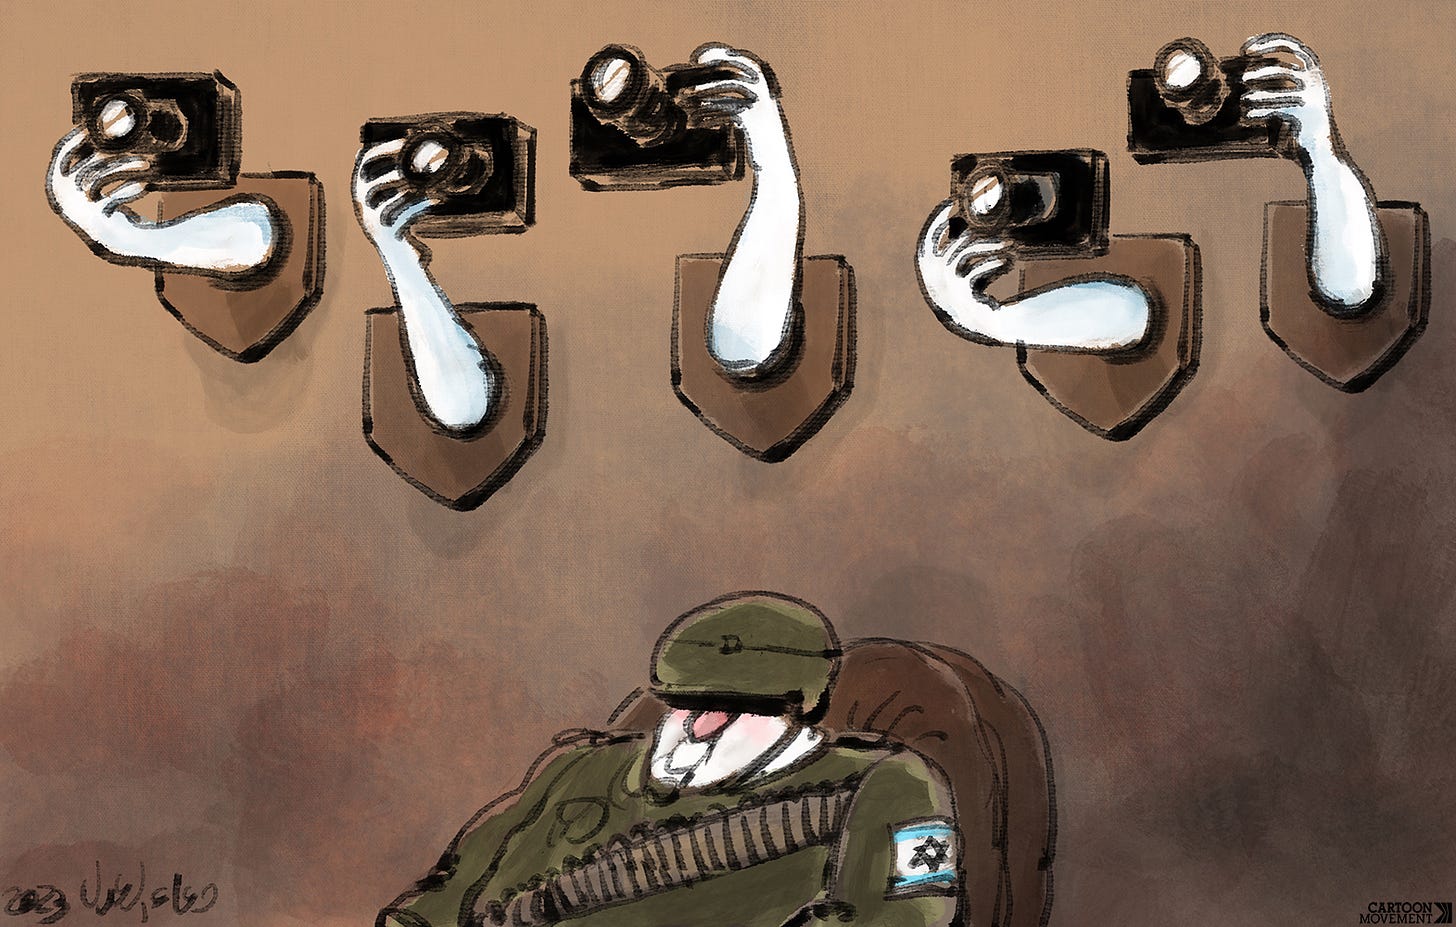 Cartoon showing an Israeli soldier sitting in an armchair, while above him we see trophies on the wall. The trophies are hands holding cameras that have been nailed to wooden shields.